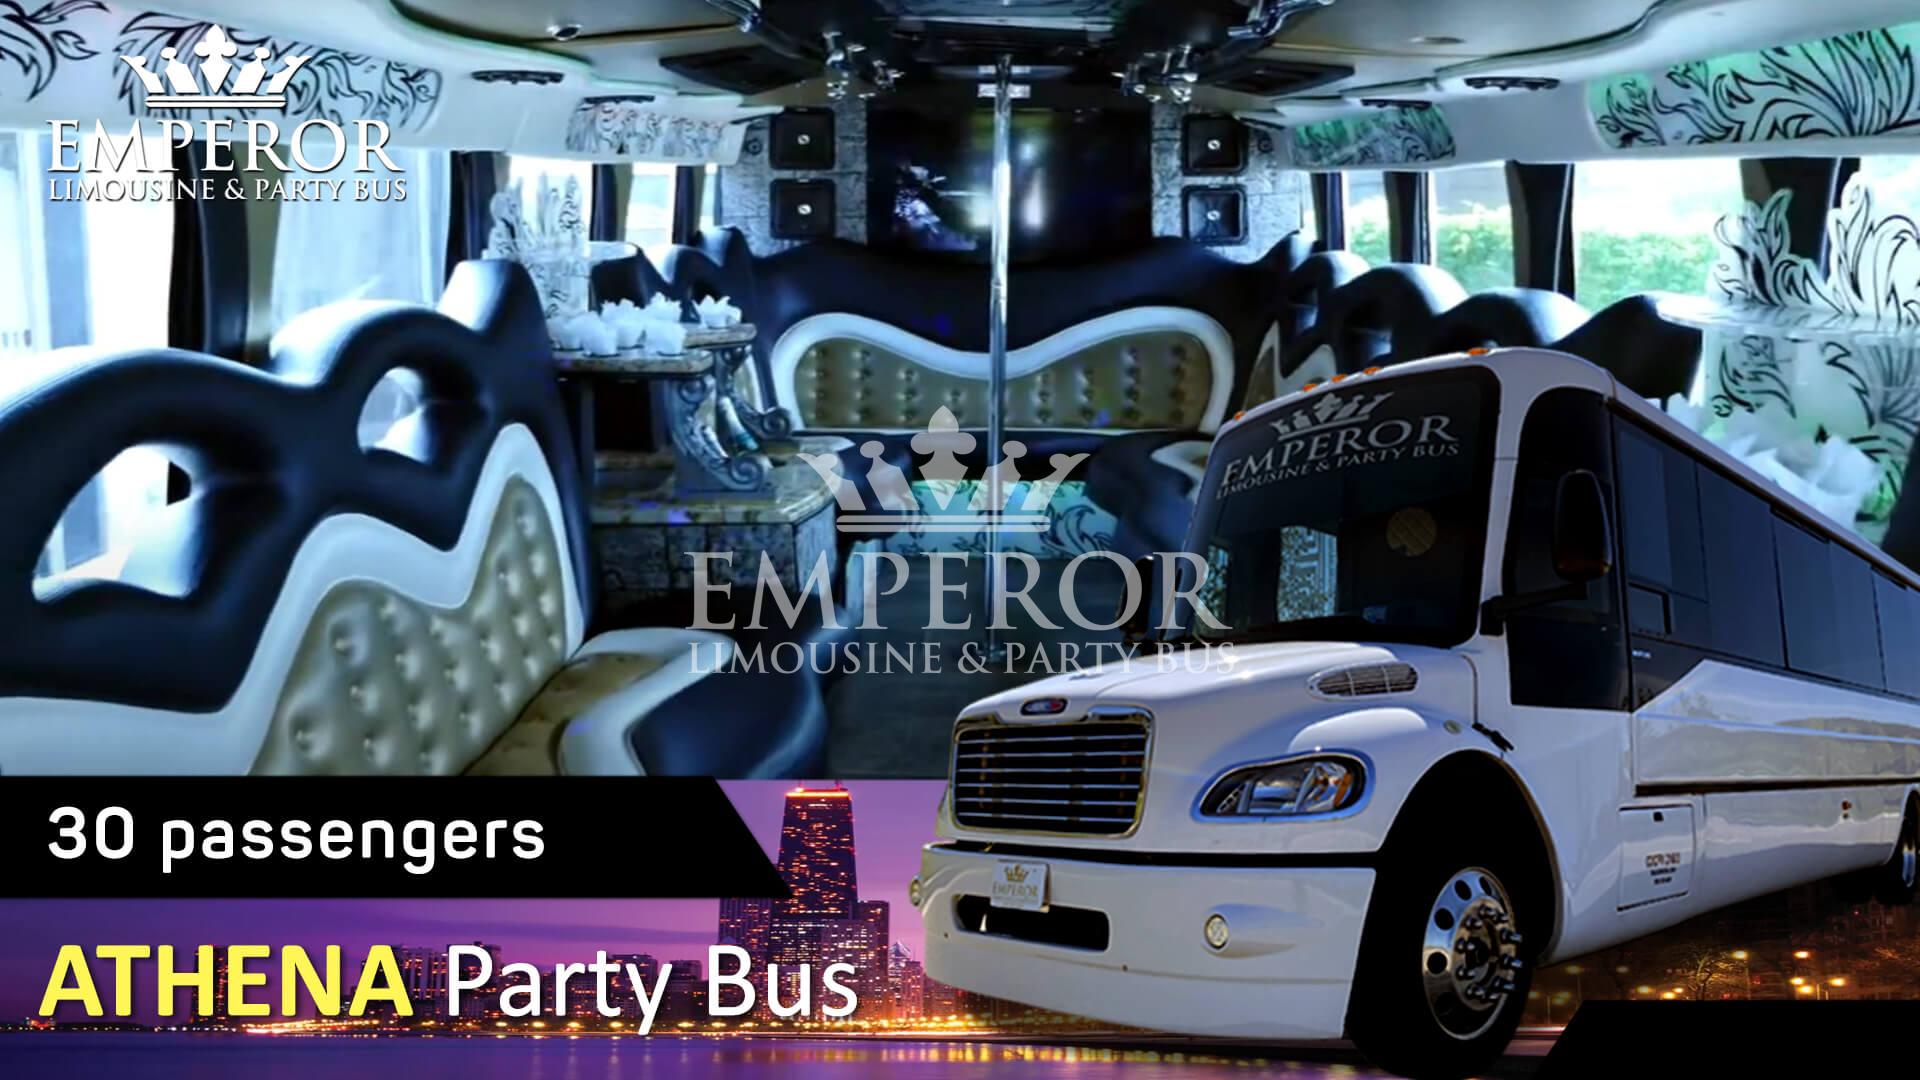 Party bus rental service in Addison - Athena Edition